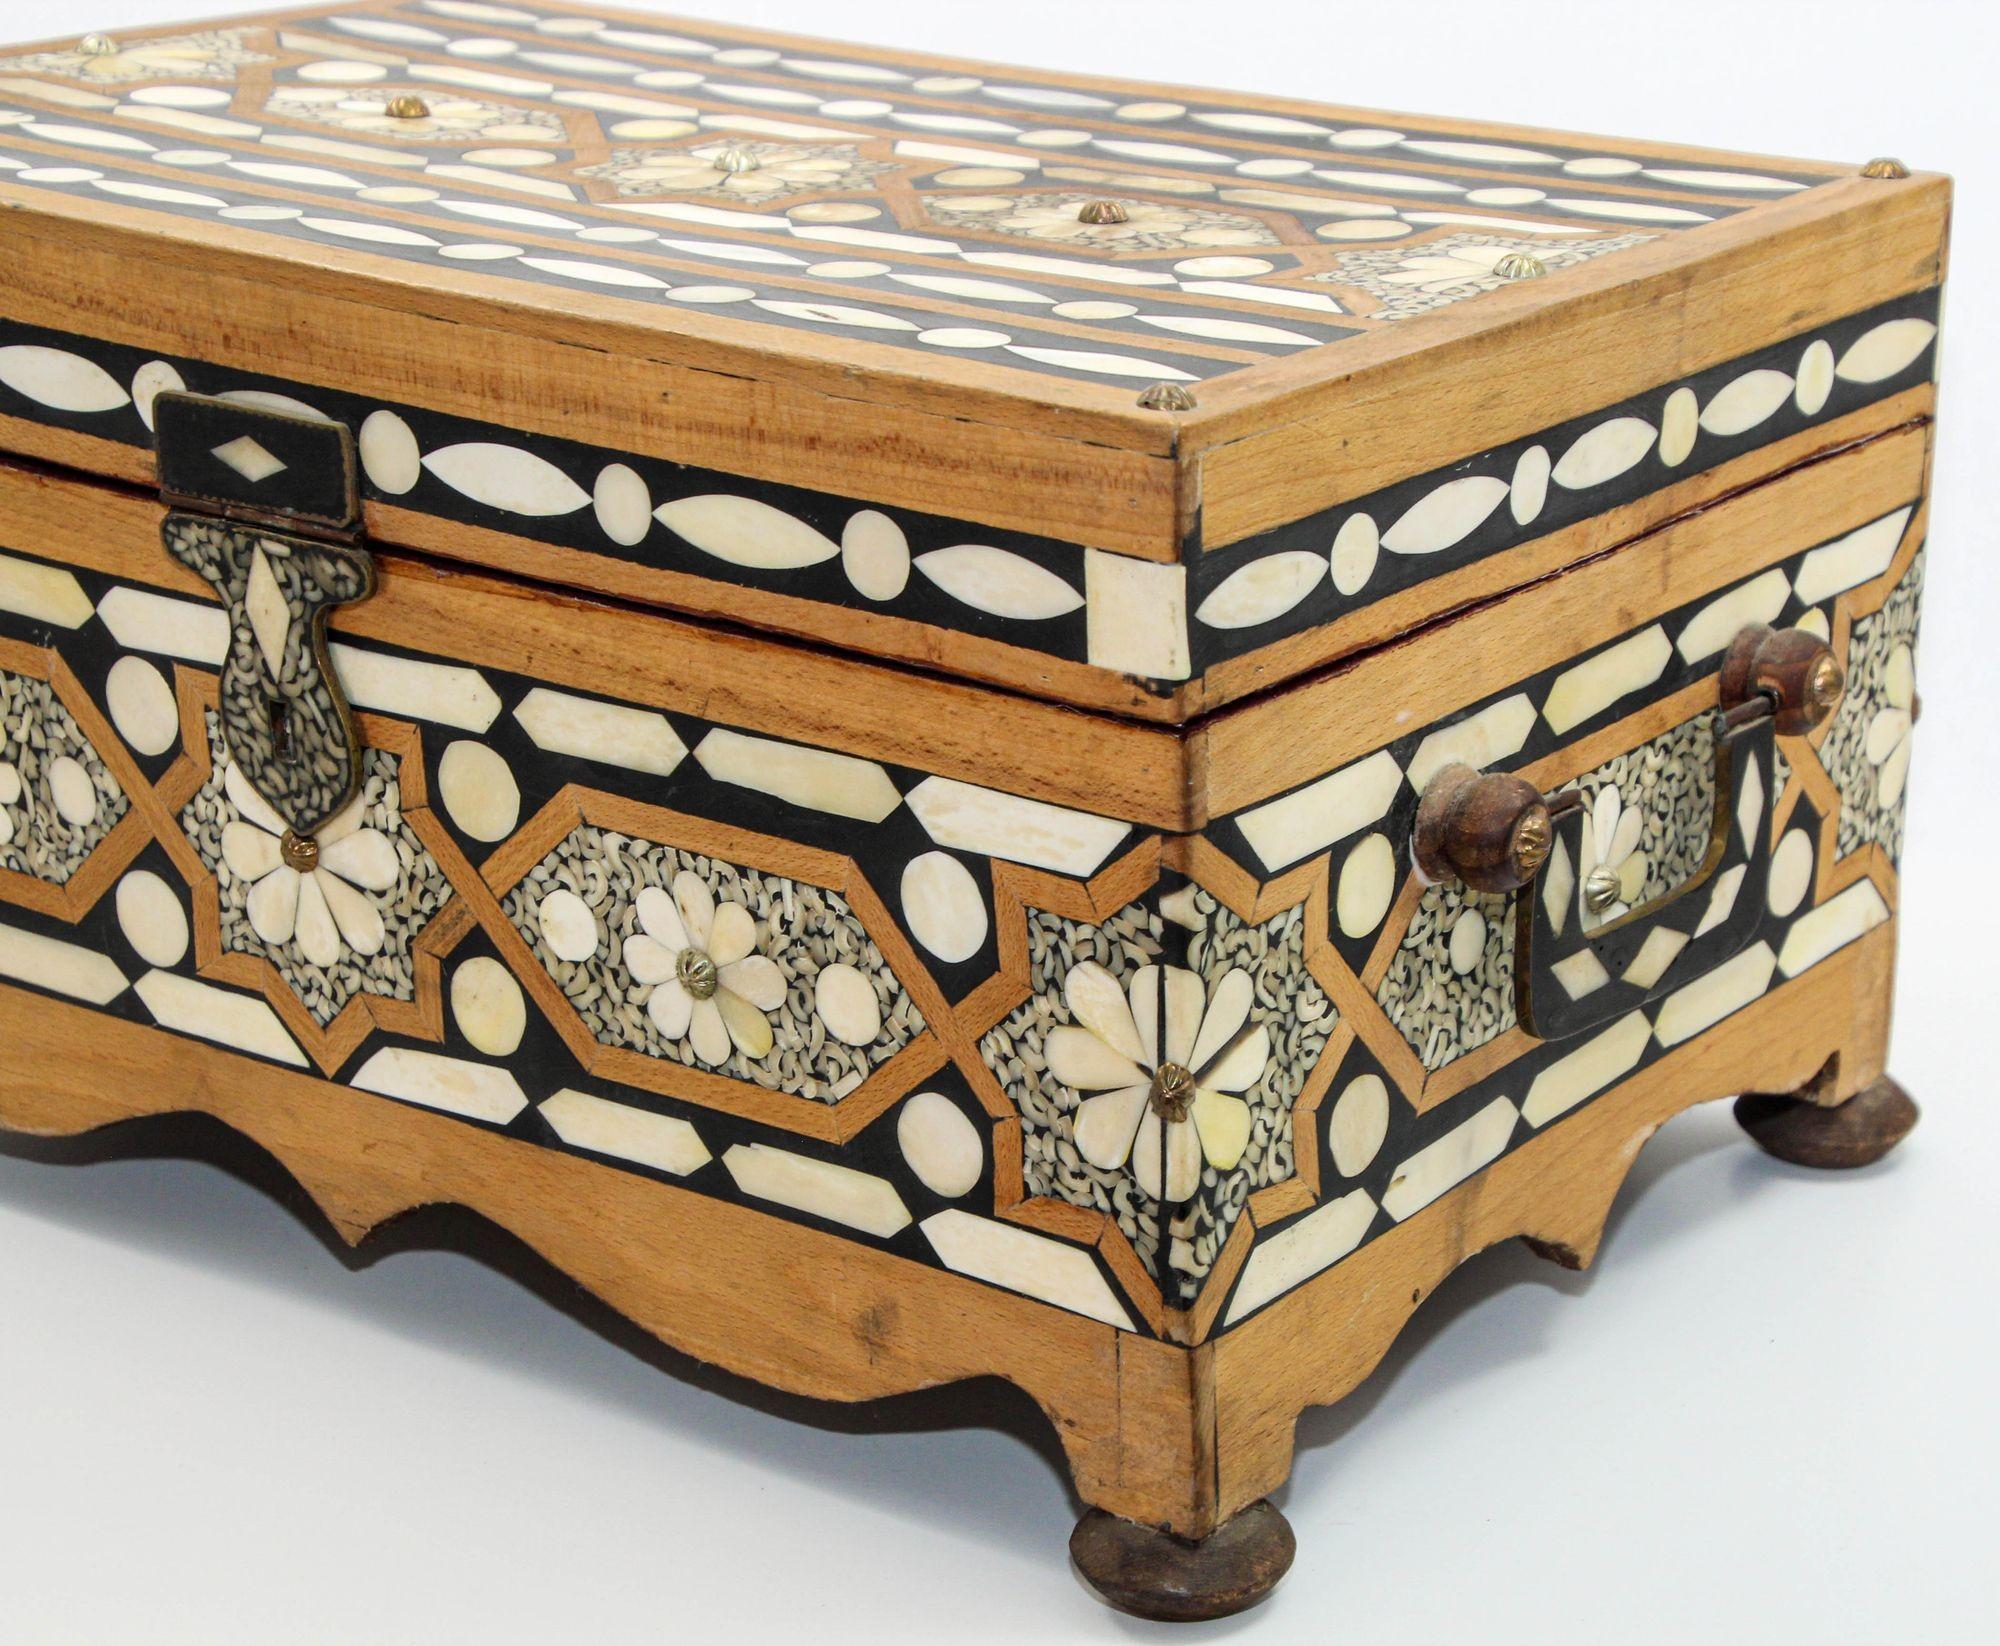 Moroccan Dowry Box Inlaid with White Camel Bone Rectangular Carved Wood Trunk For Sale 4